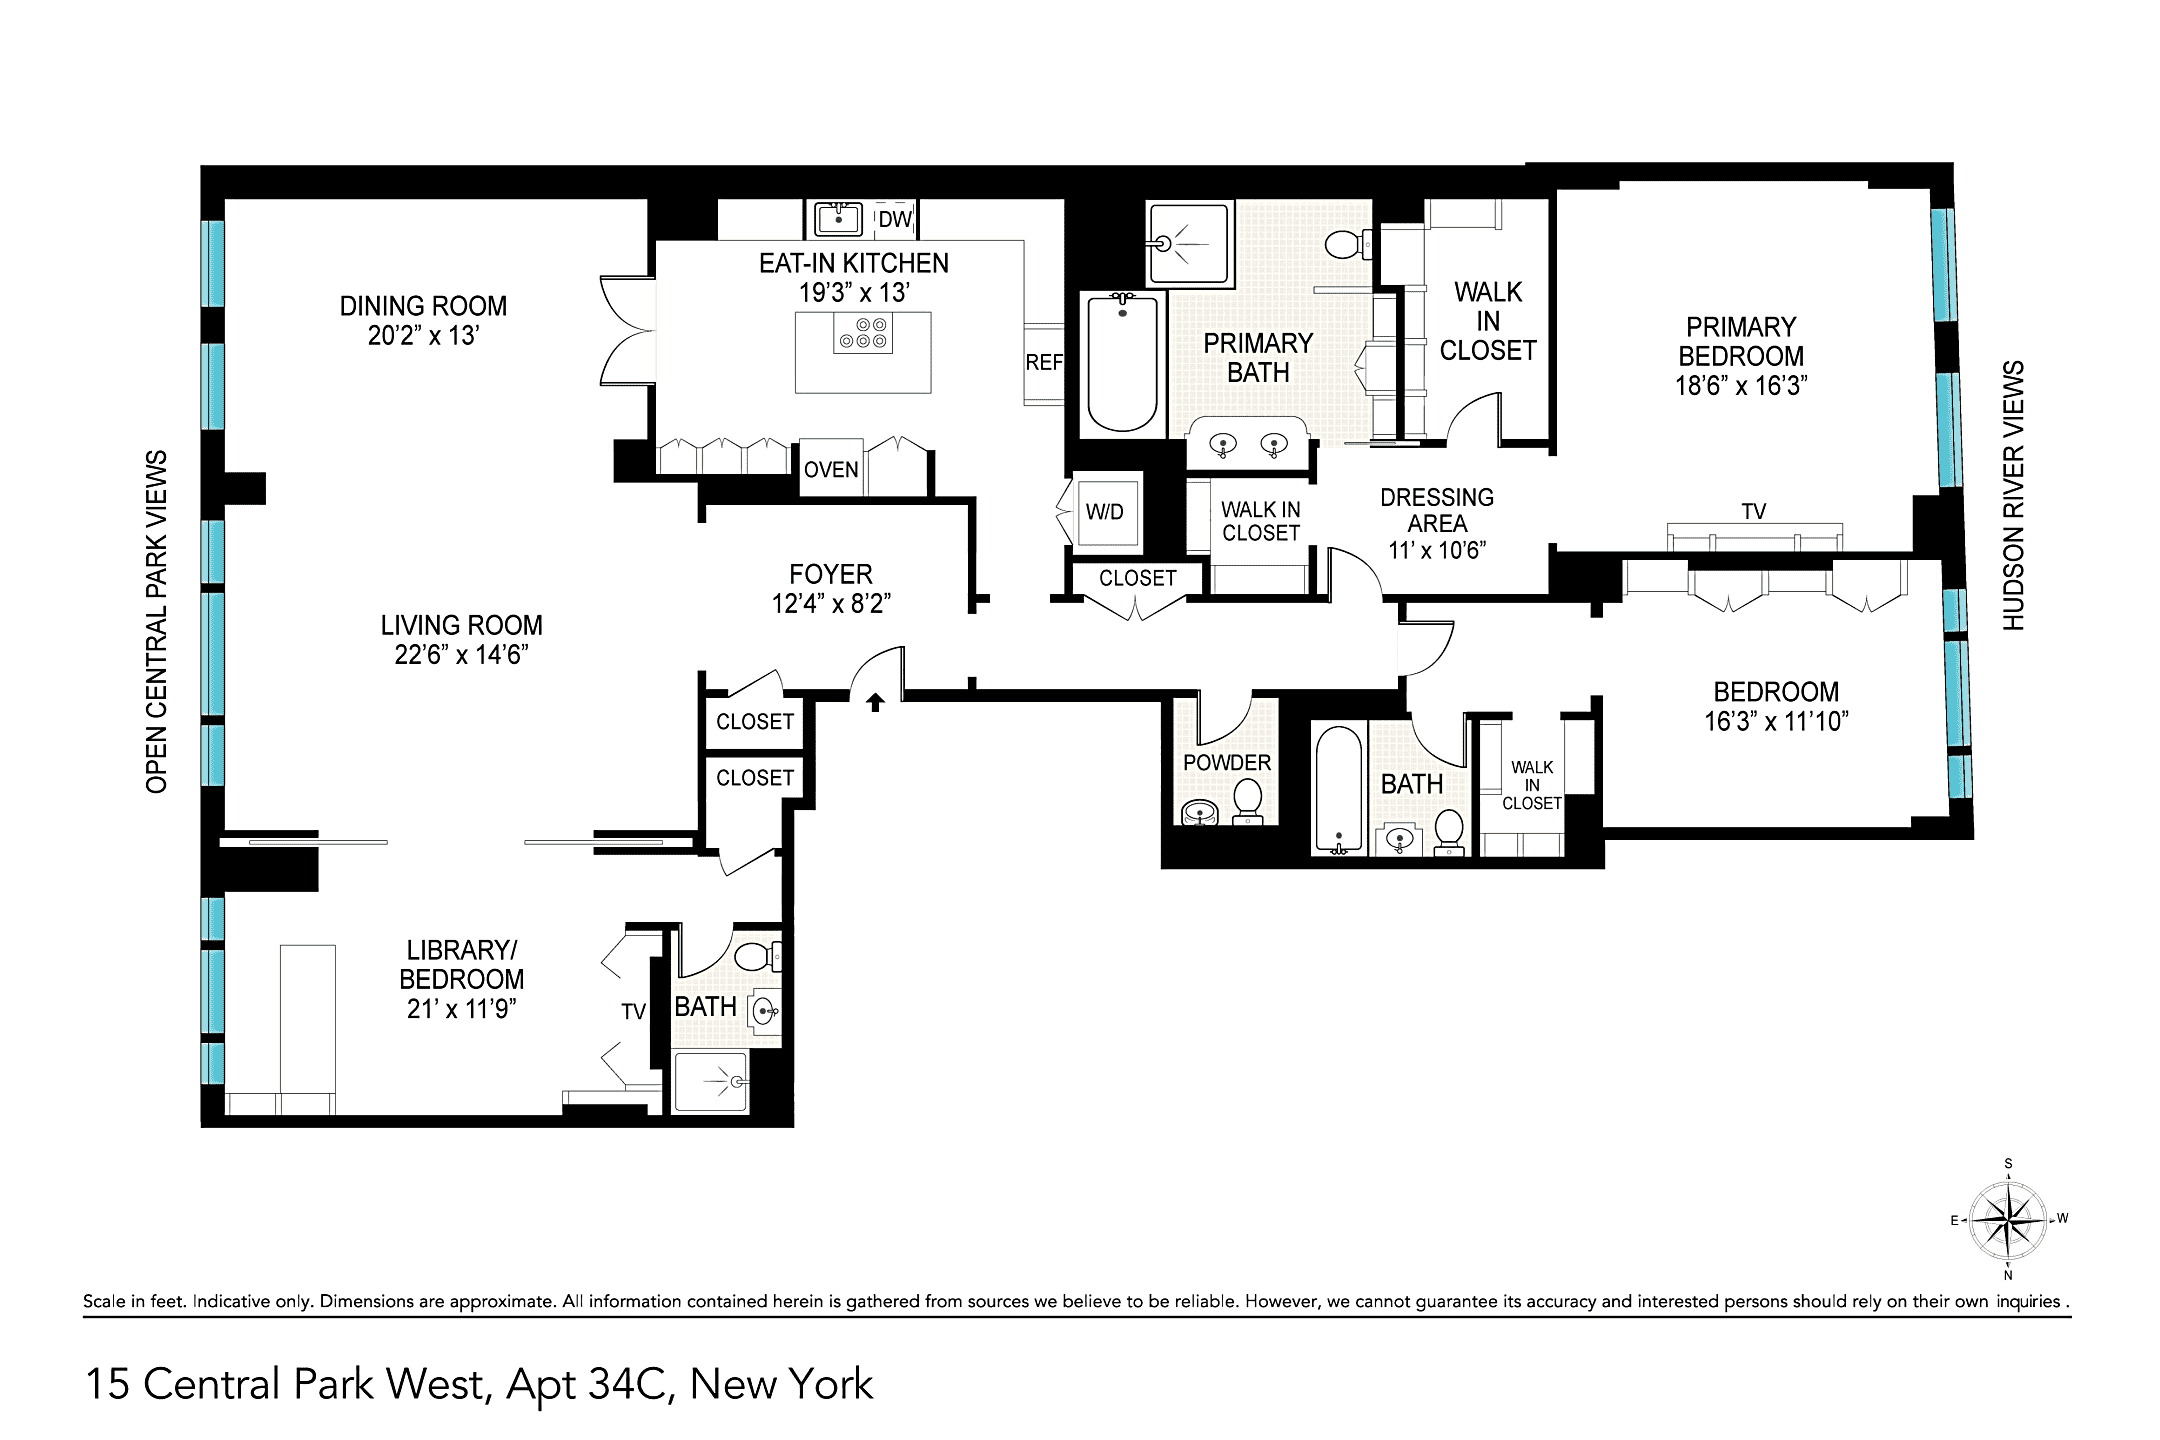 15 Central Park West #34C Apartments - New York, NY 10023